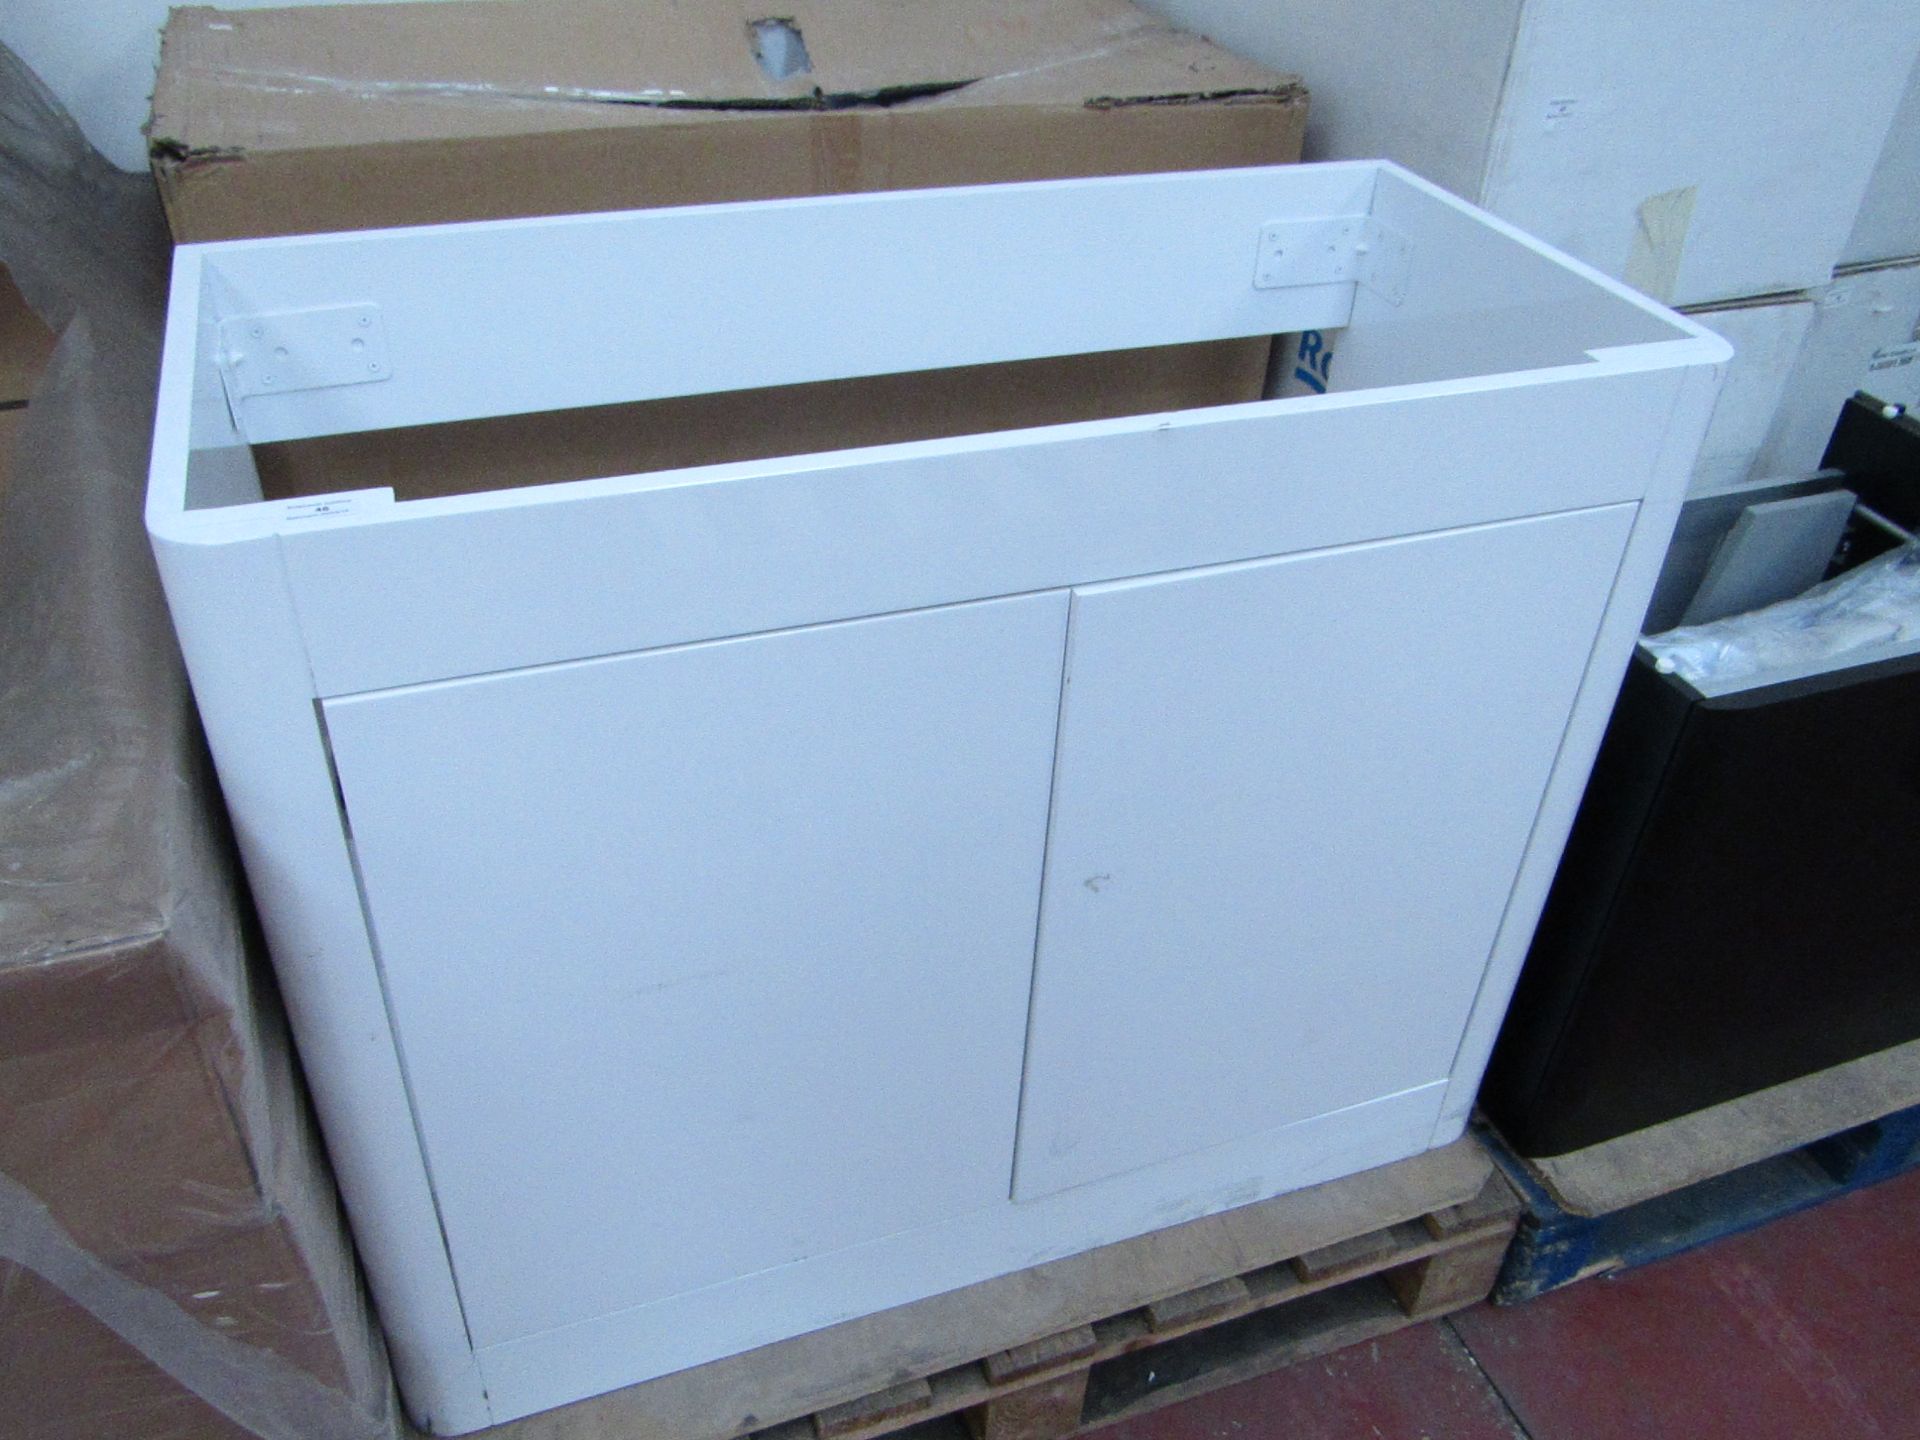 Purity ice white 1000cm x 46cm x 80cm floor standing door unit. Has some scuffs and marks, boxed.